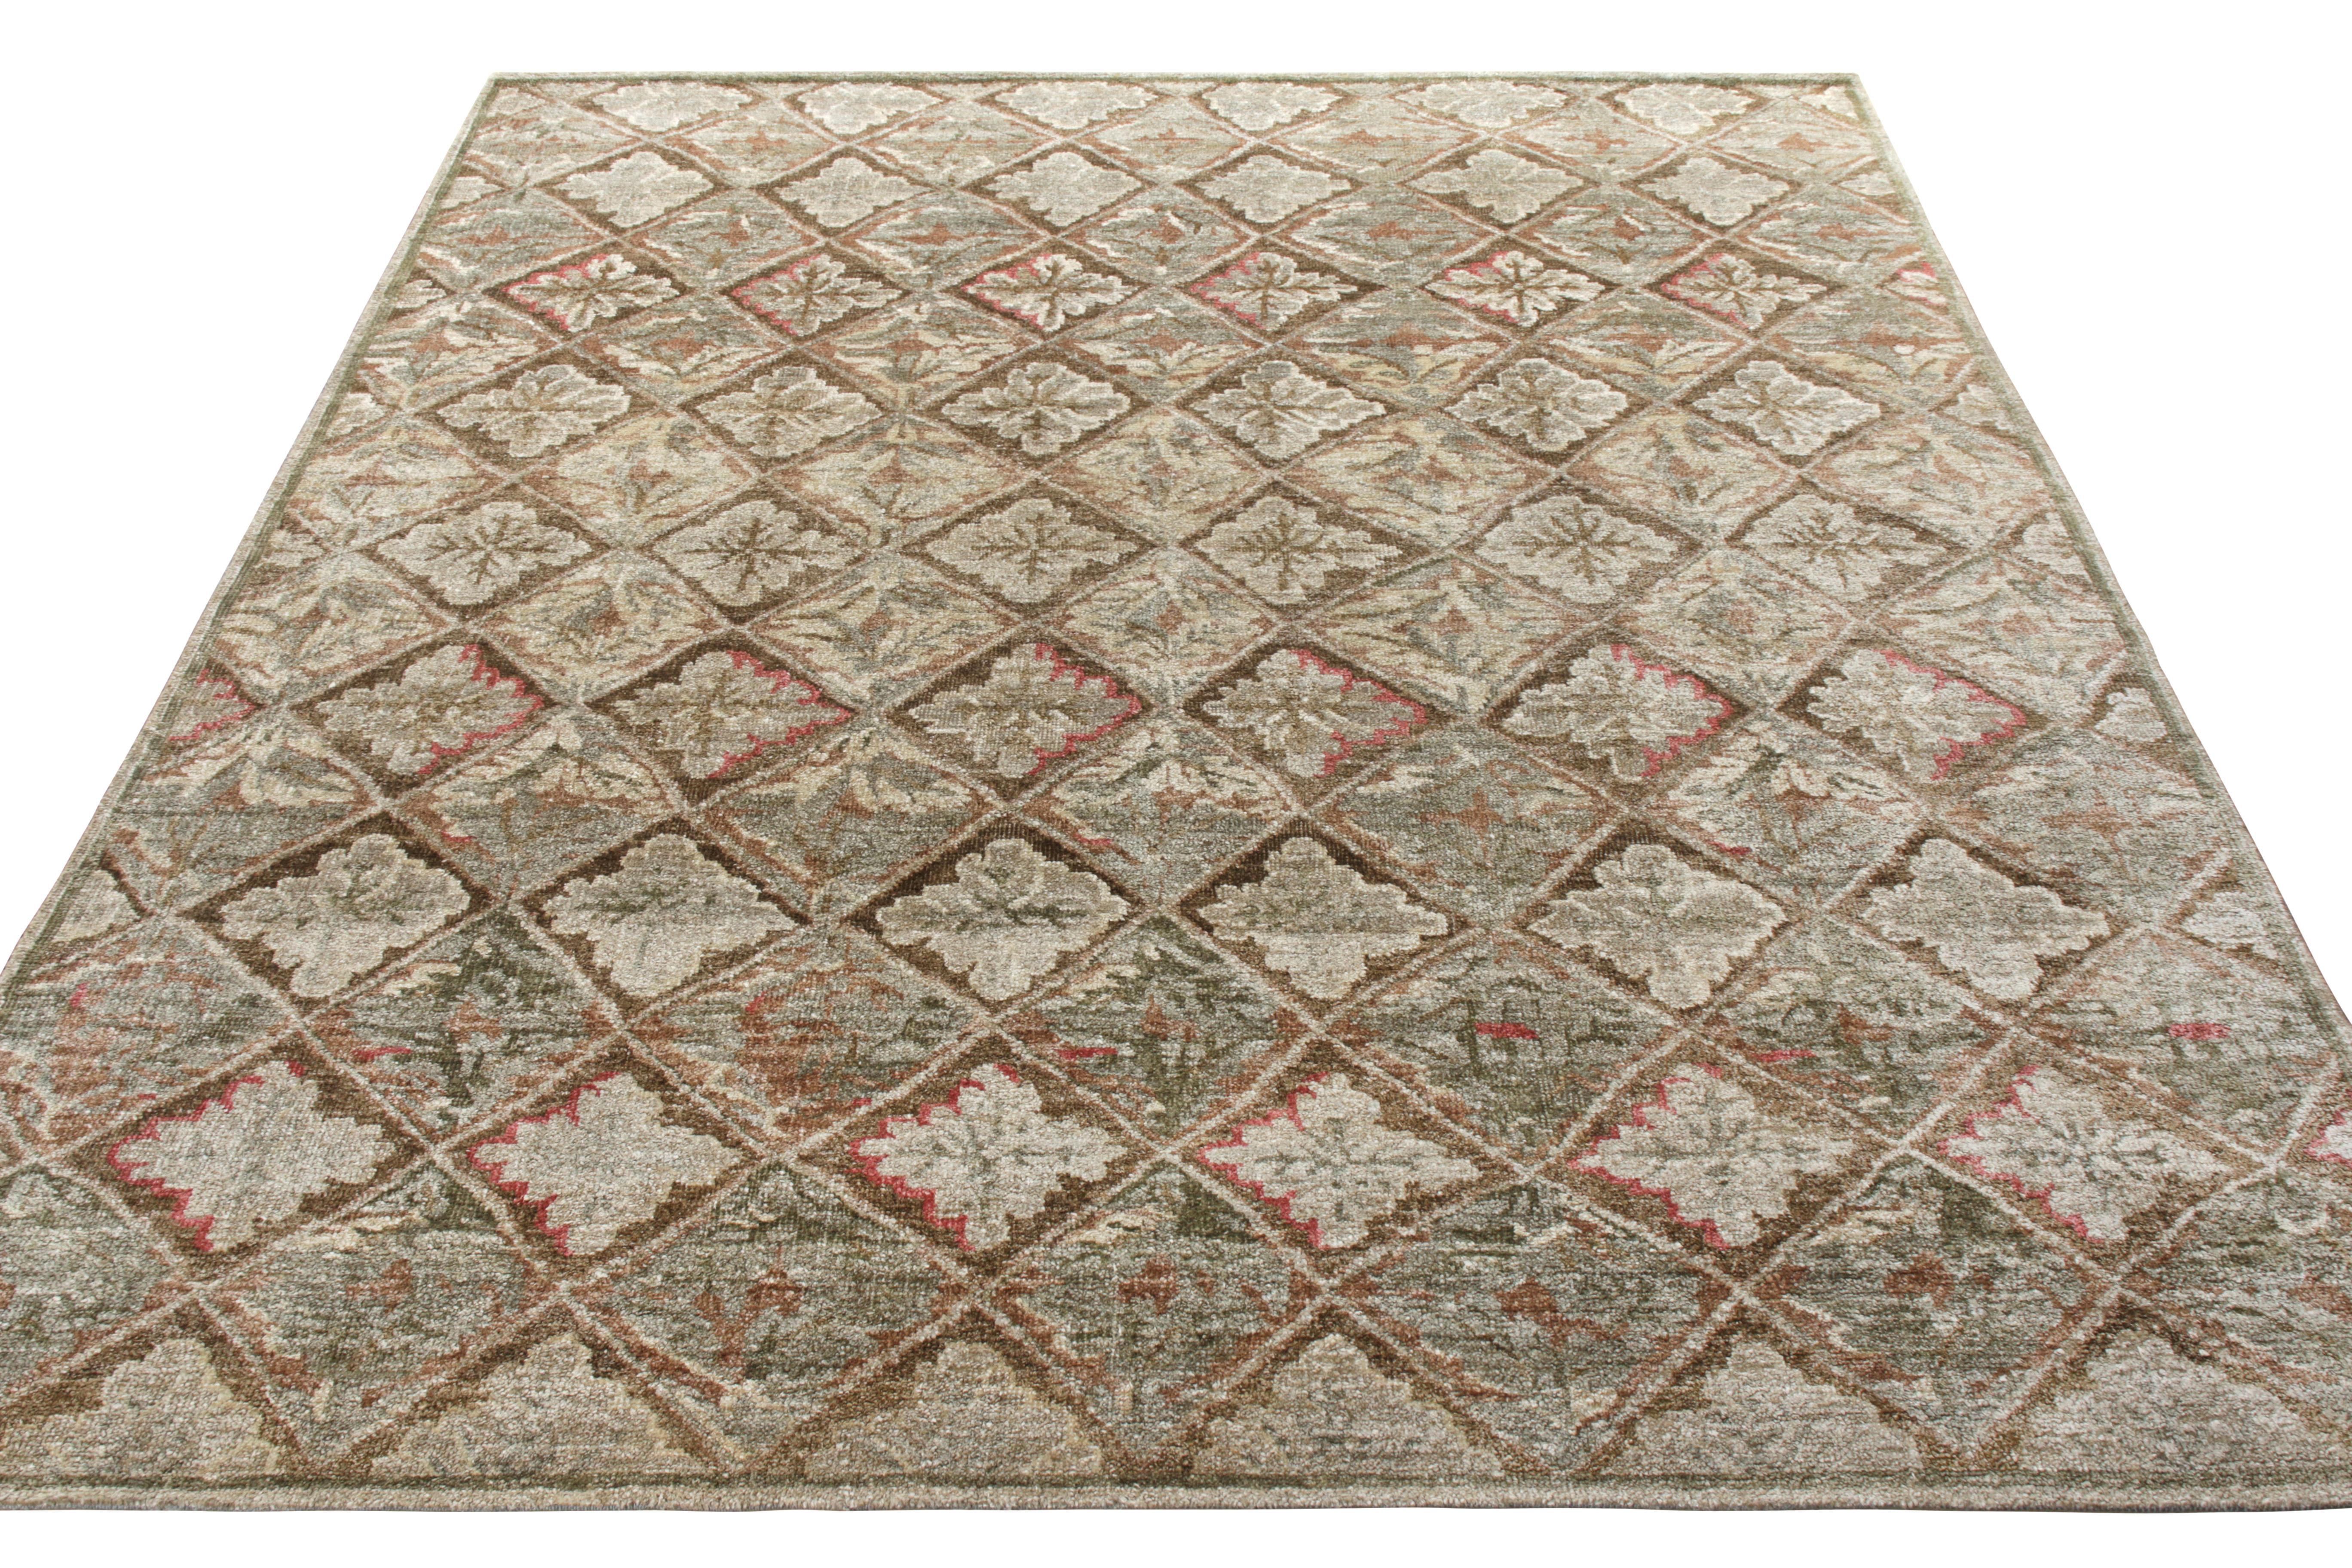 Rug & Kilim presents an 8x10 rug inspired by 18th century Aubusson rugs in the new additions to their European Collection. 

Hand-knotted in wool and silk, its design is an all-over pattern with diamond trellises and floral motifs in green and brown